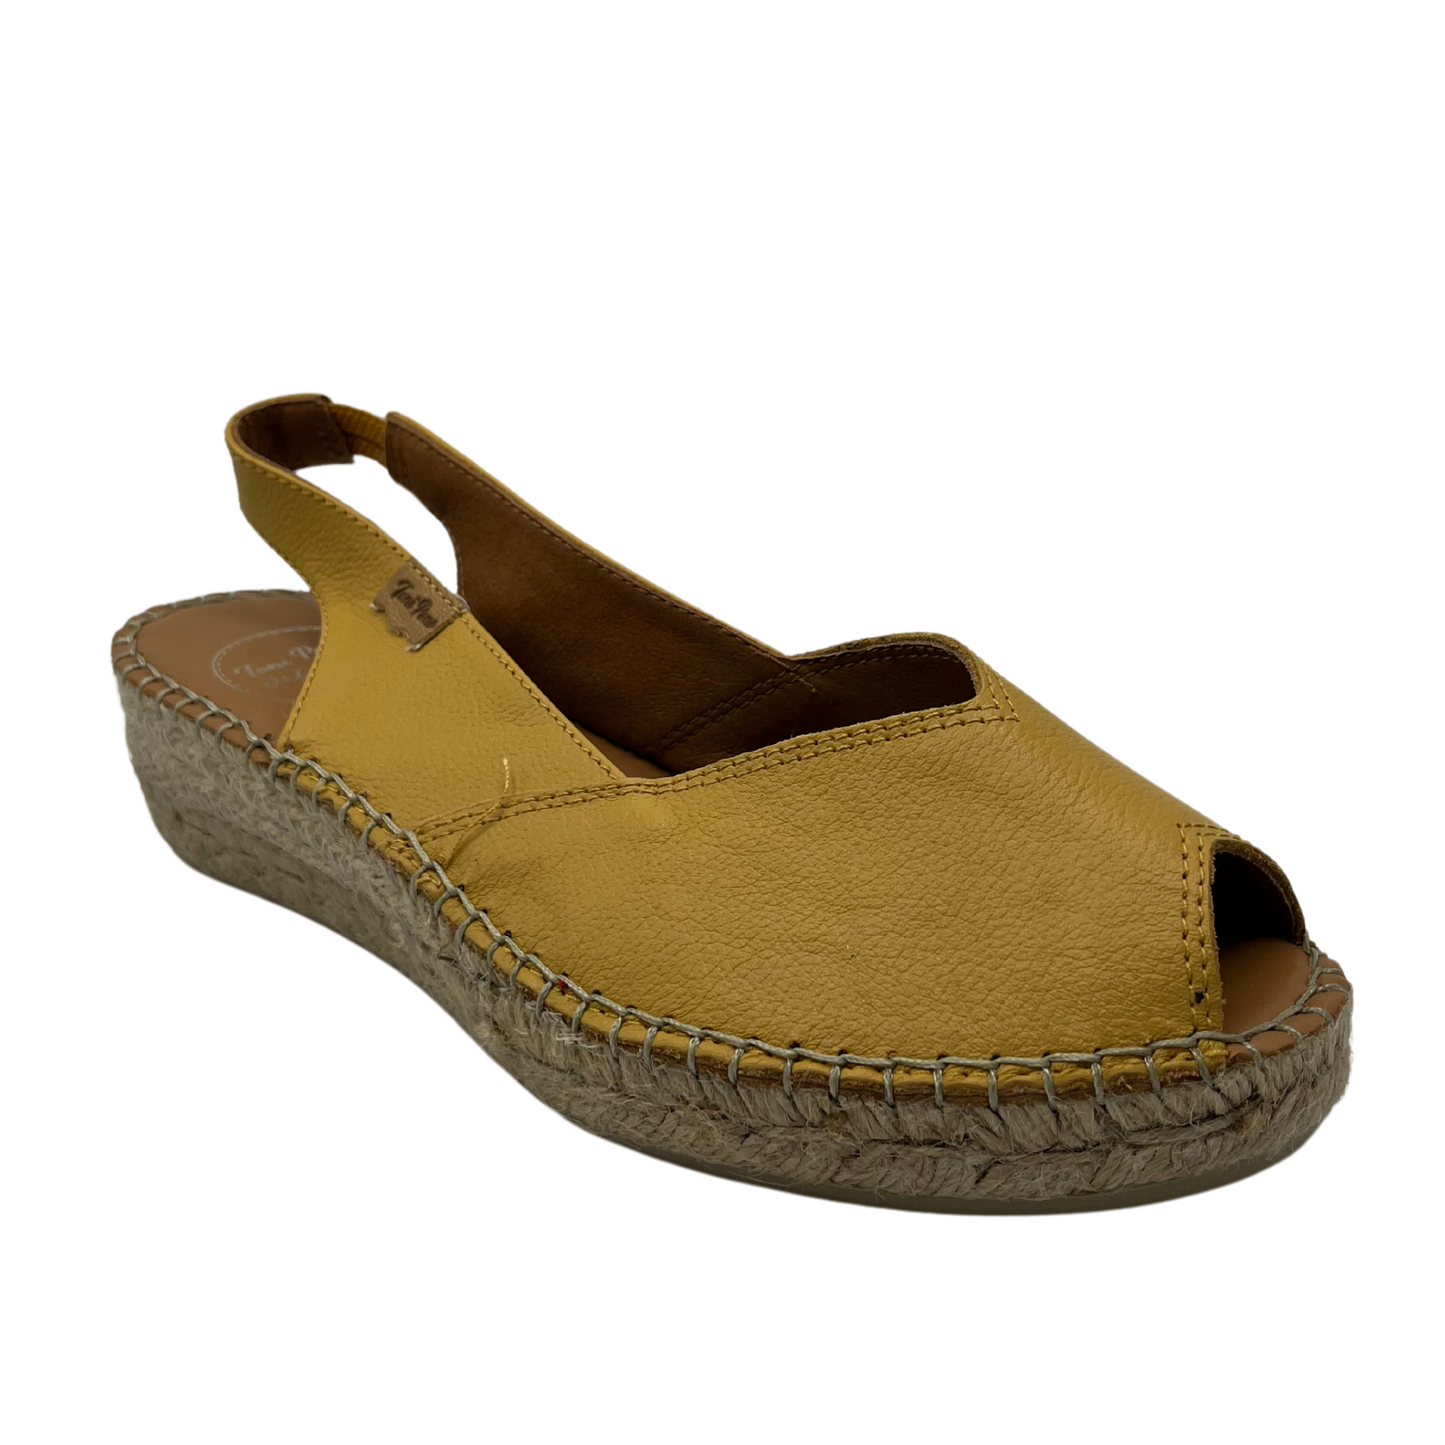 45 degree angled view of ocre coloured espadrille sandal with wedge heel and peep toe